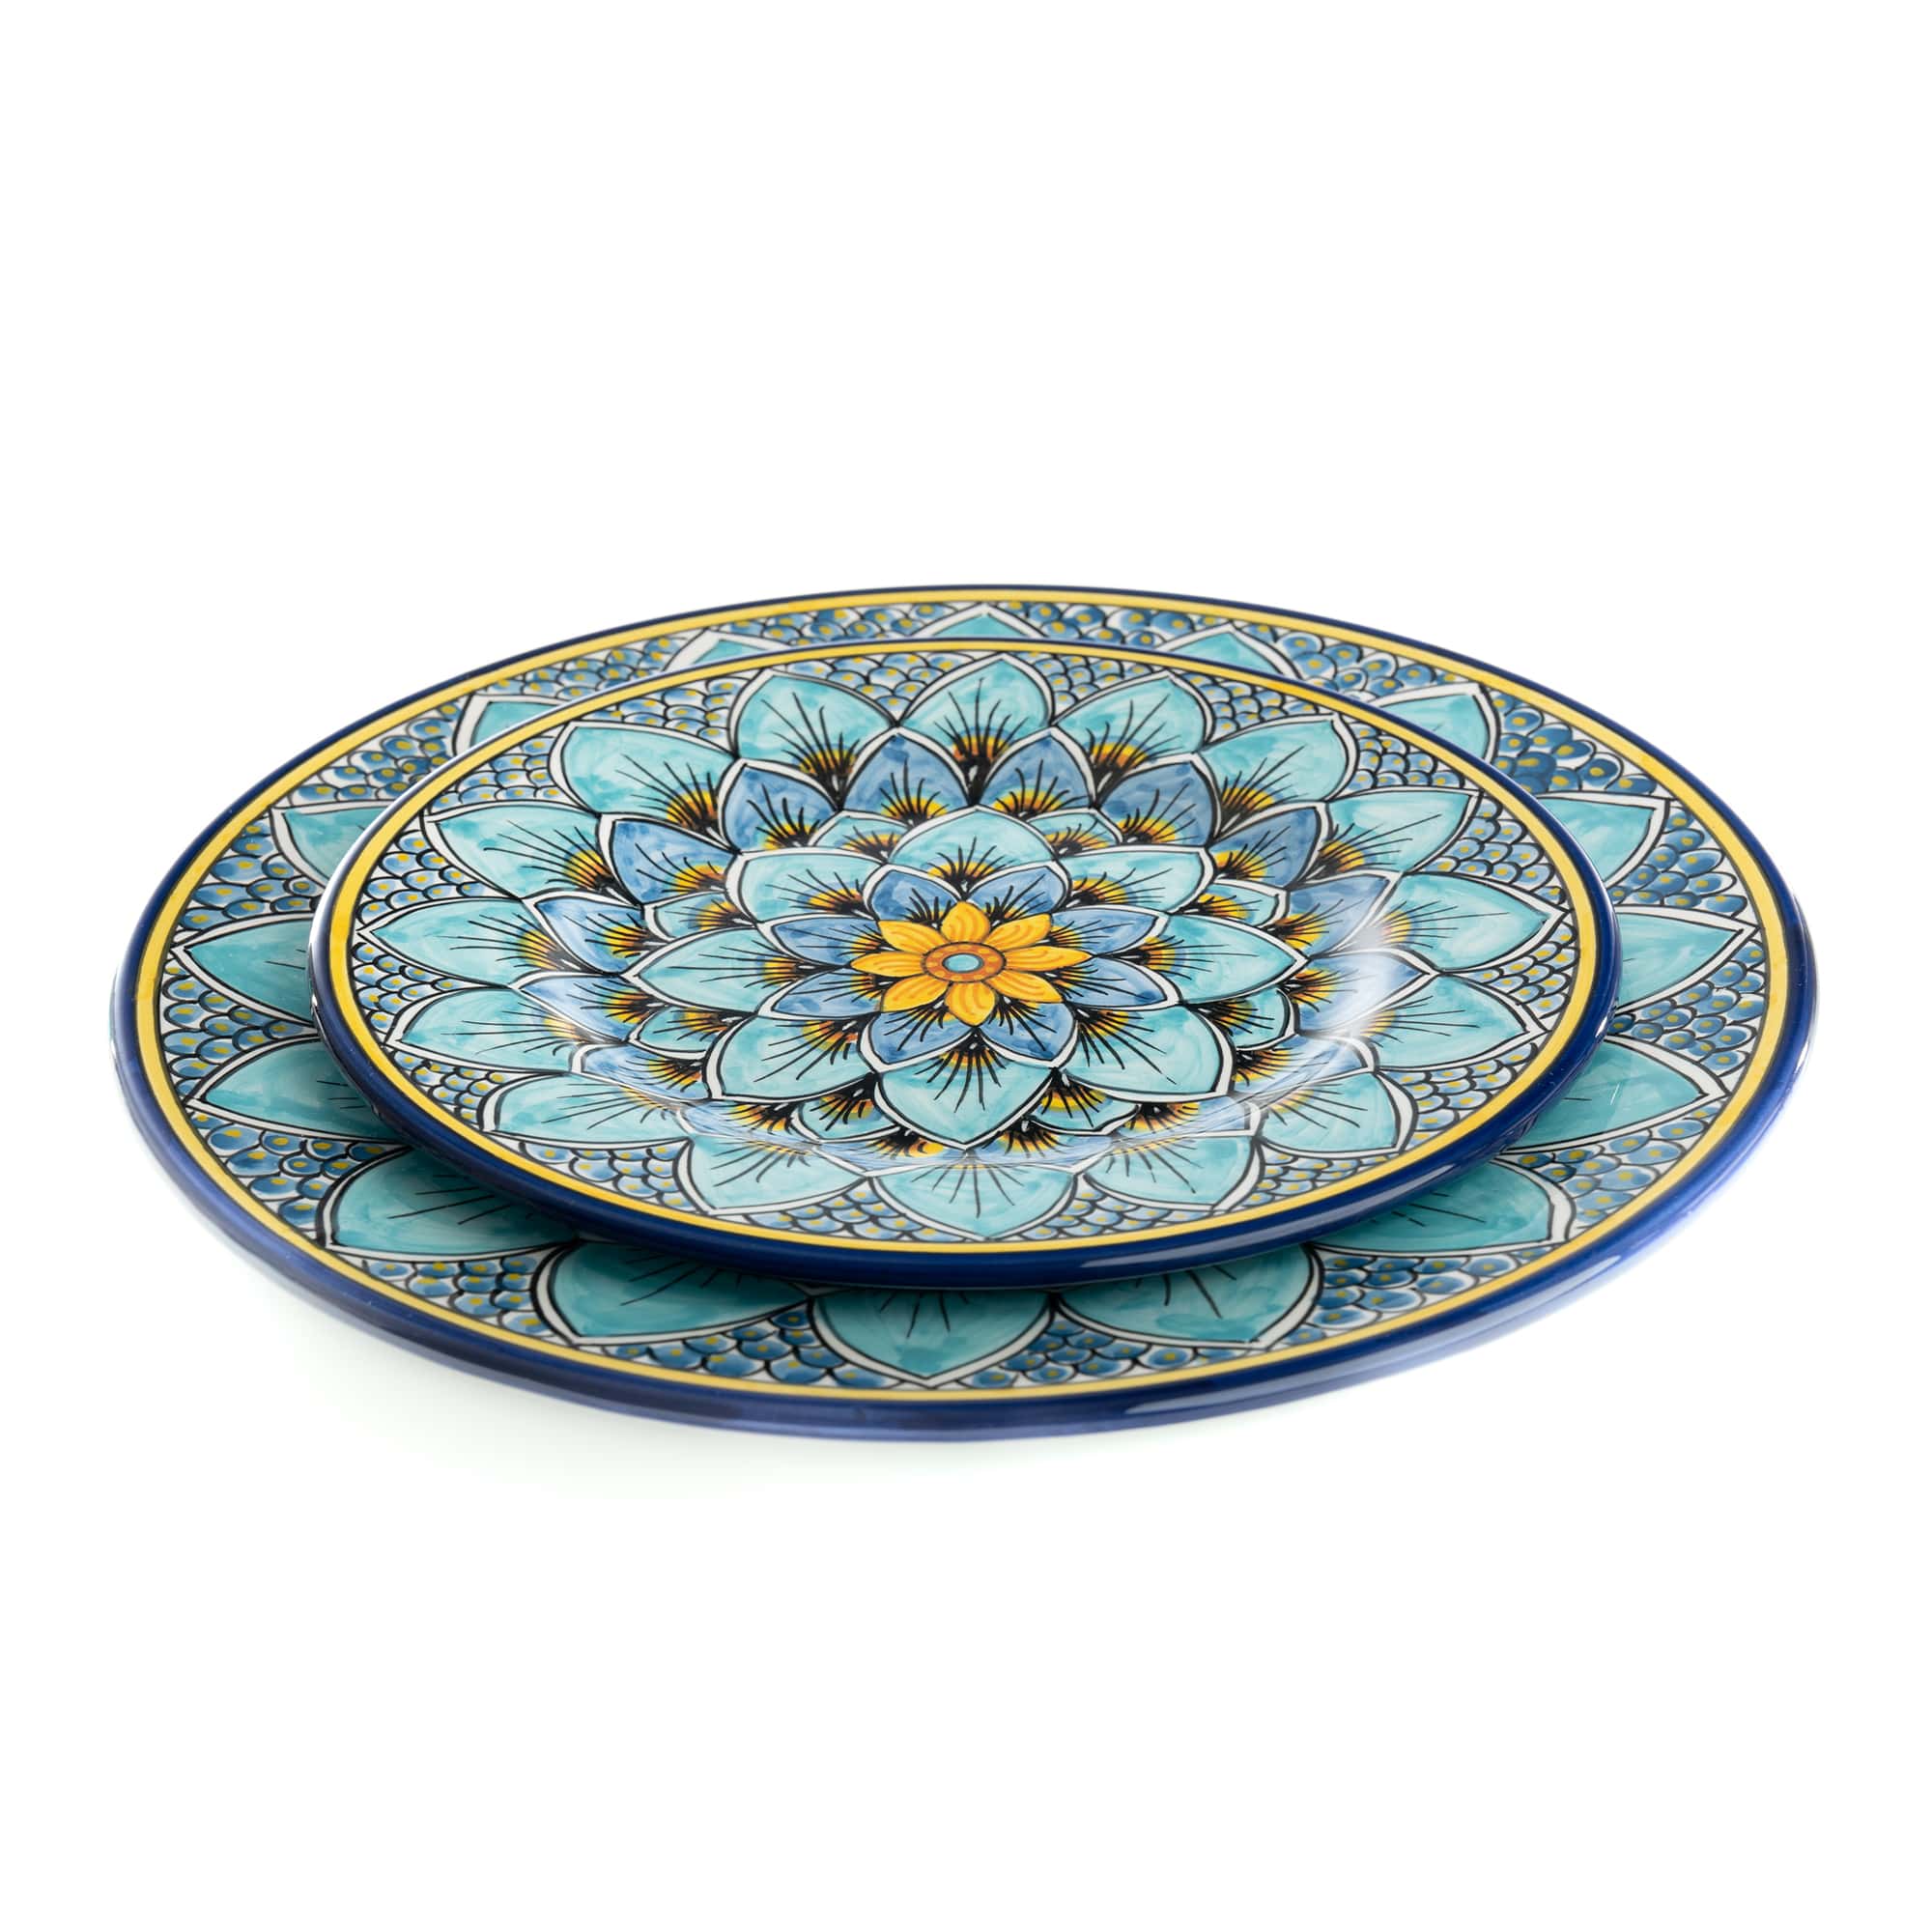 Geribi Salad Plate (PG09) Blues Peacock Design, ceramics, pottery, italian design, majolica, handmade, handcrafted, handpainted, home decor, kitchen art, home goods, deruta, majolica, Artisan, treasures, traditional art, modern art, gift ideas, style, SF, shop small business, artists, shop online, landmark store, legacy, one of a kind, limited edition, gift guide, gift shop, retail shop, decorations, shopping, italy, home staging, home decorating, home interiors